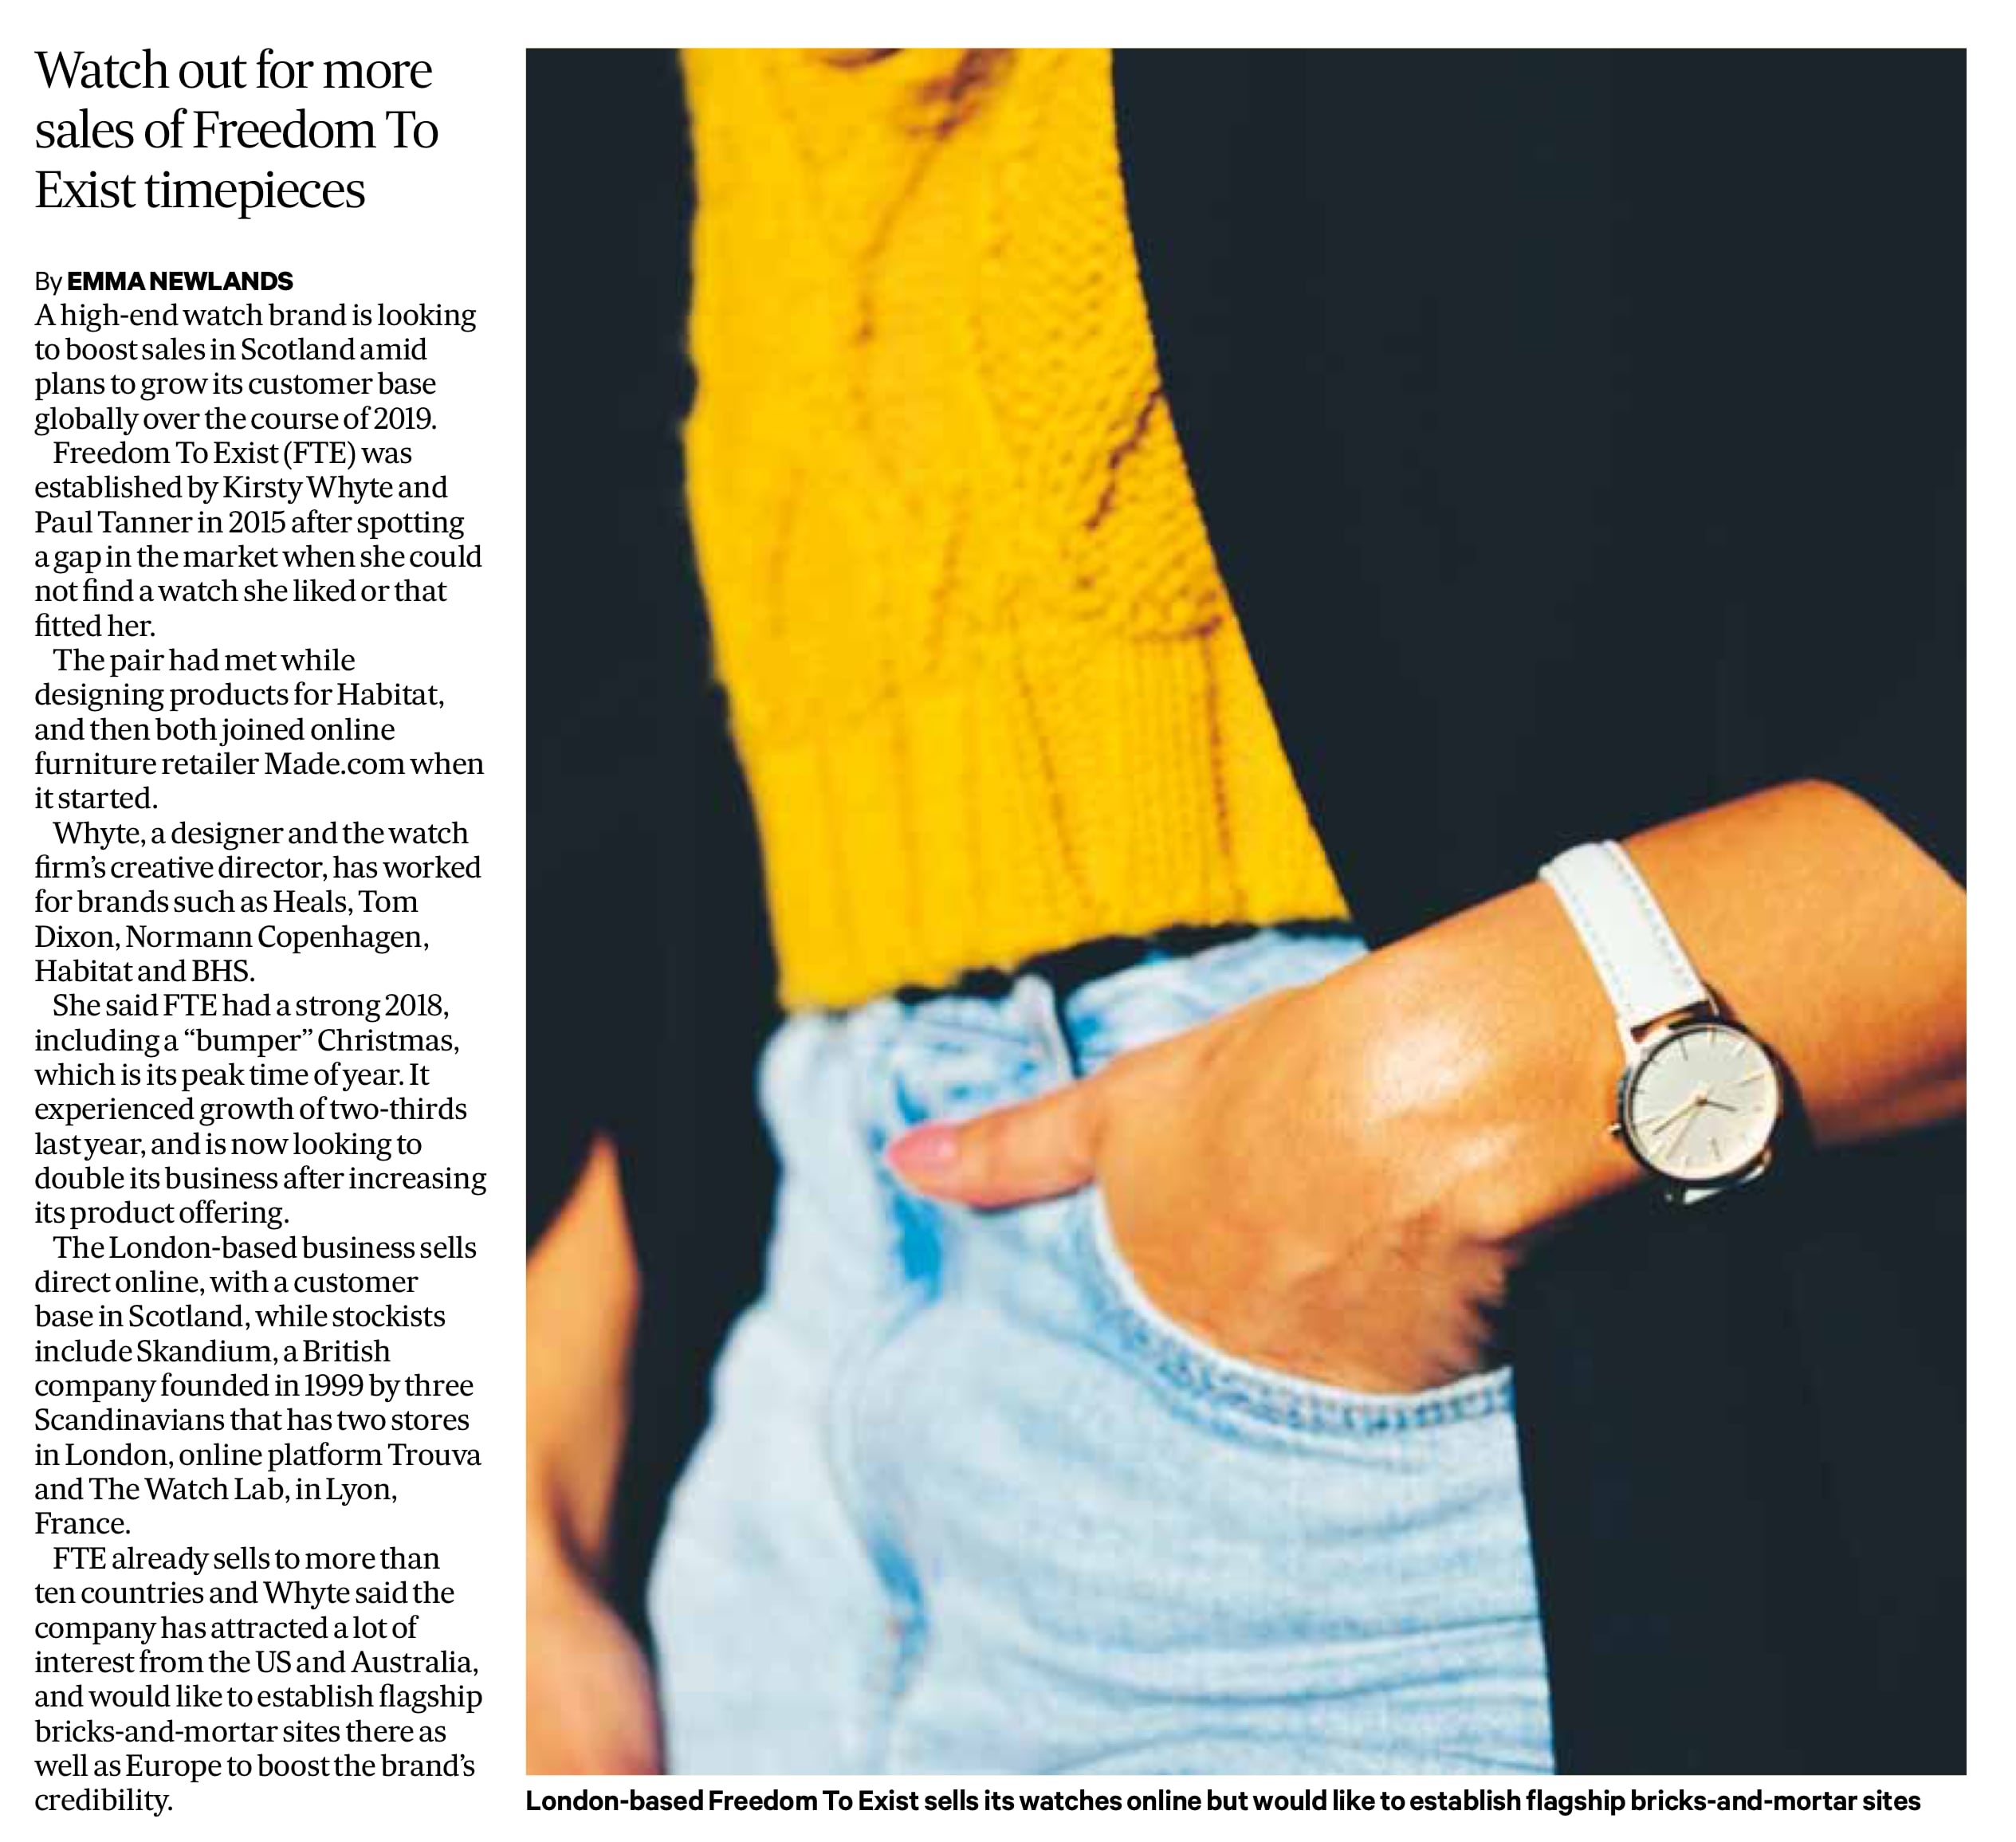 The Scotsman - Freedom To Exist Minimal Watches - Kirsty Whyte